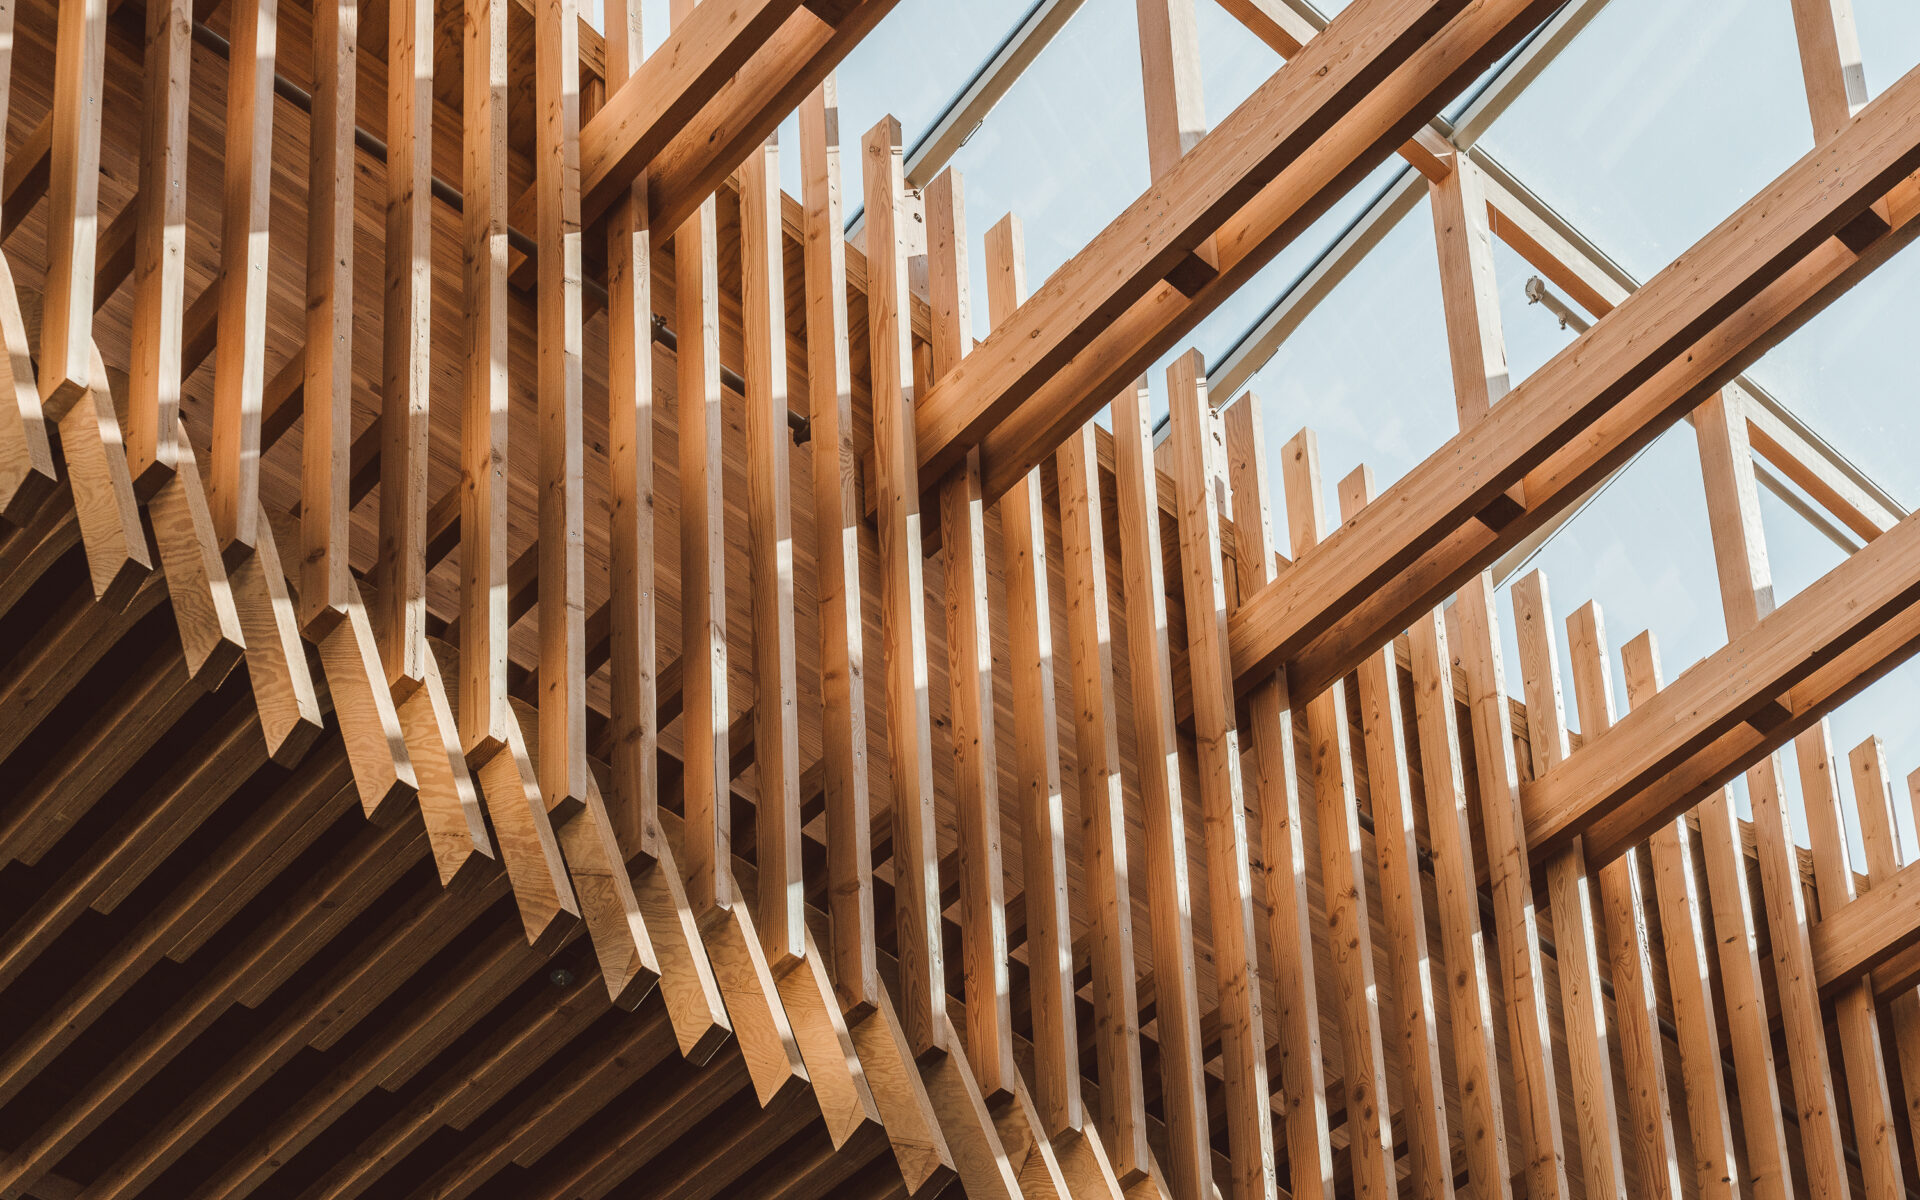 Renewable, locally-sourced mass timber for the Portland International Airport project designed by ZGF Architects and owned by the Port of Portland.